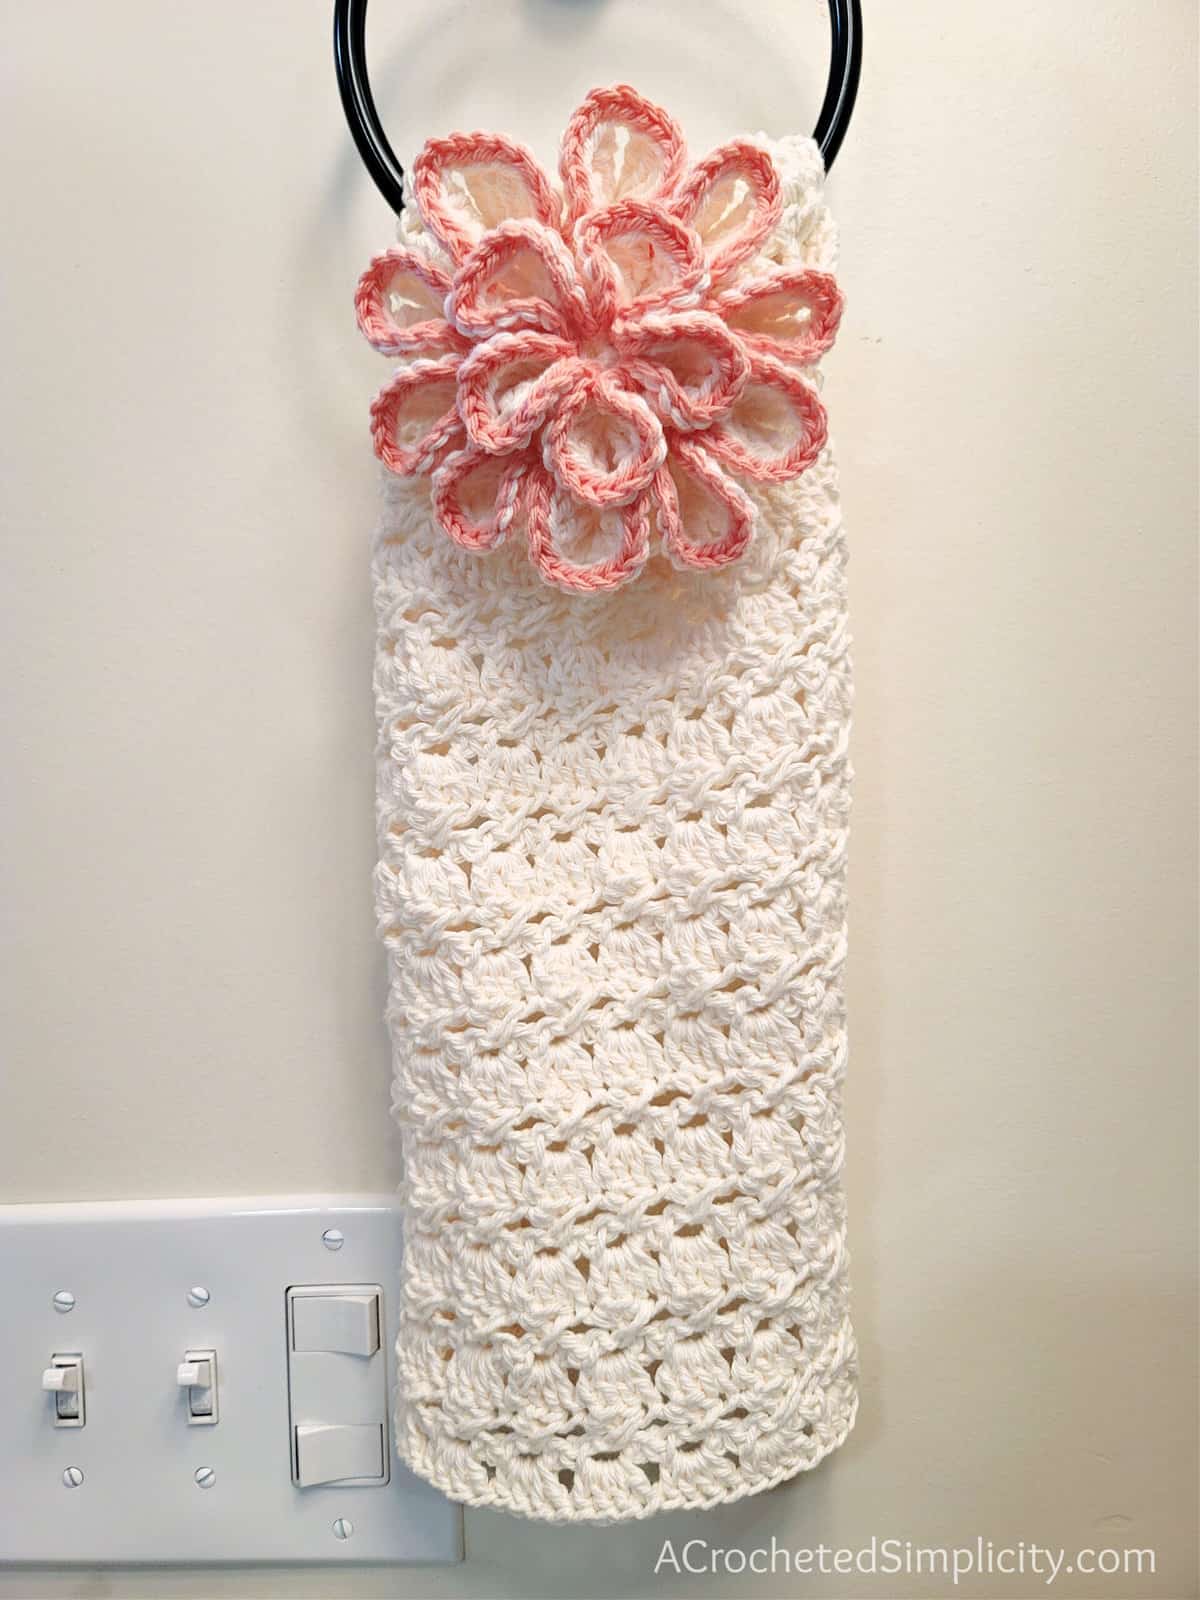 Flowery Hanging Kitchen Towel Crocheted